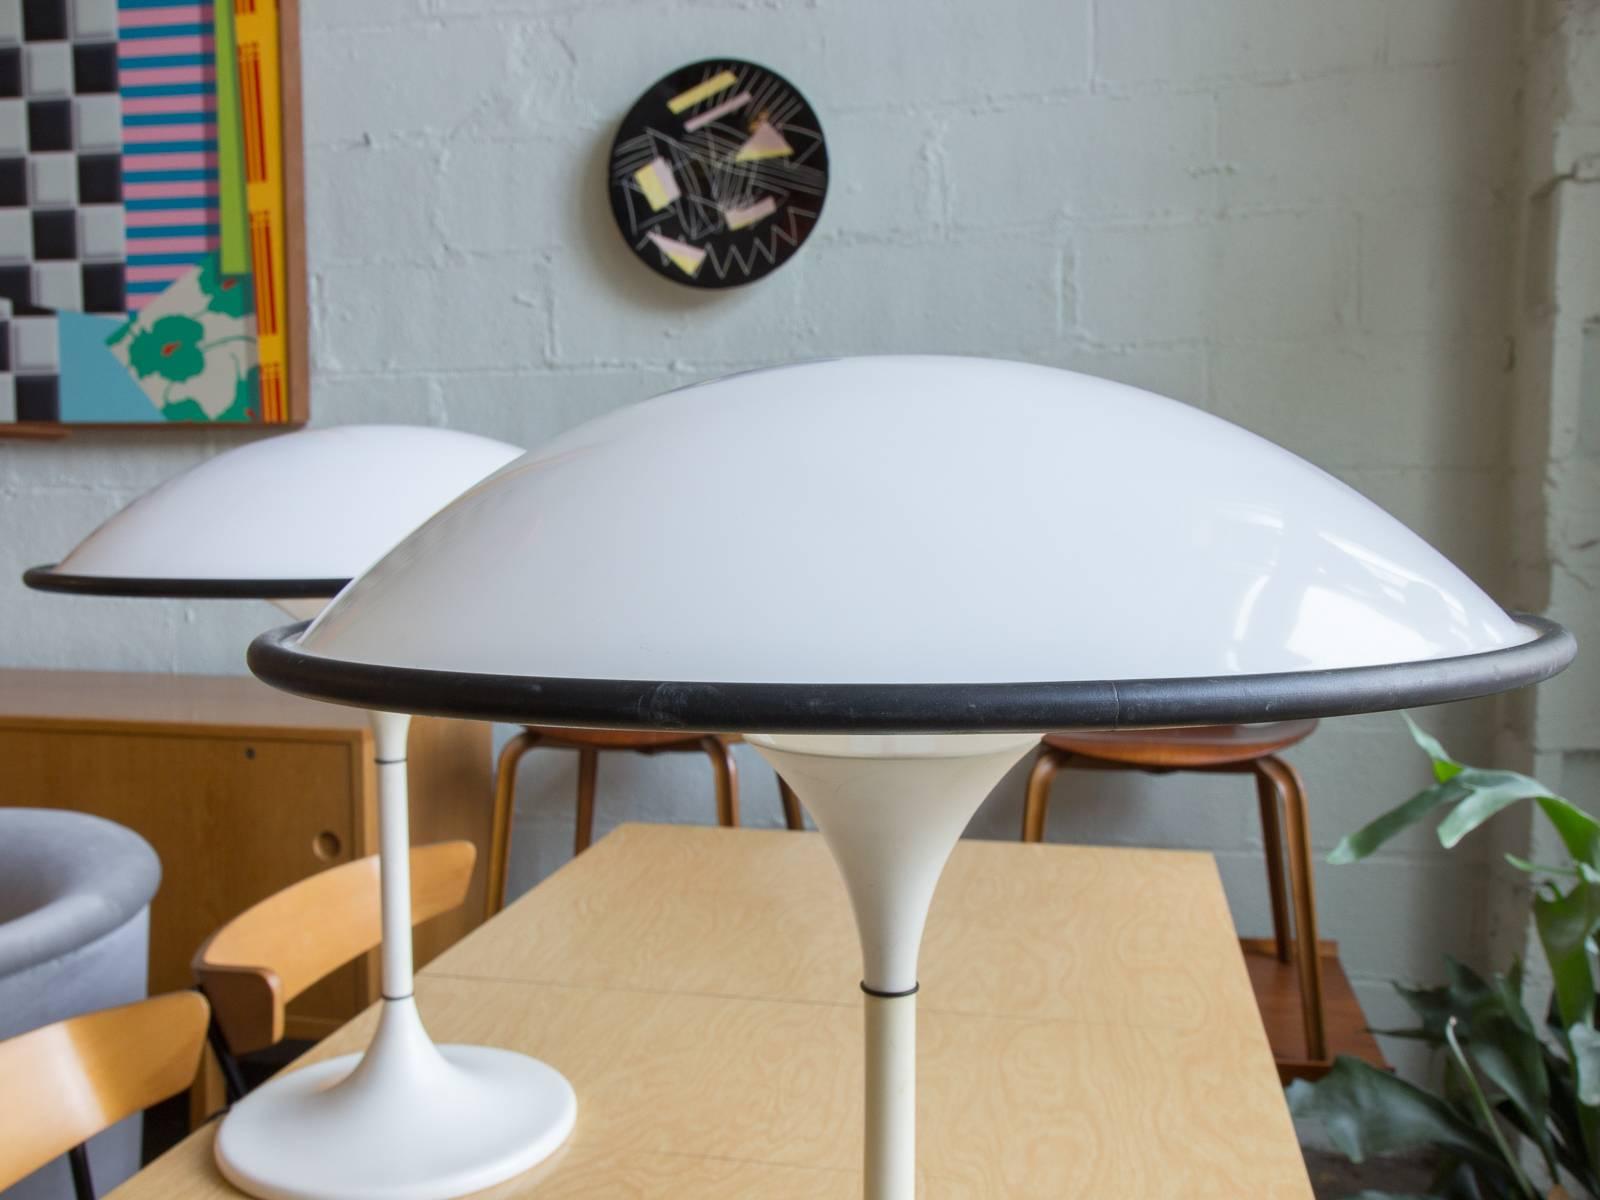 space age table lamp